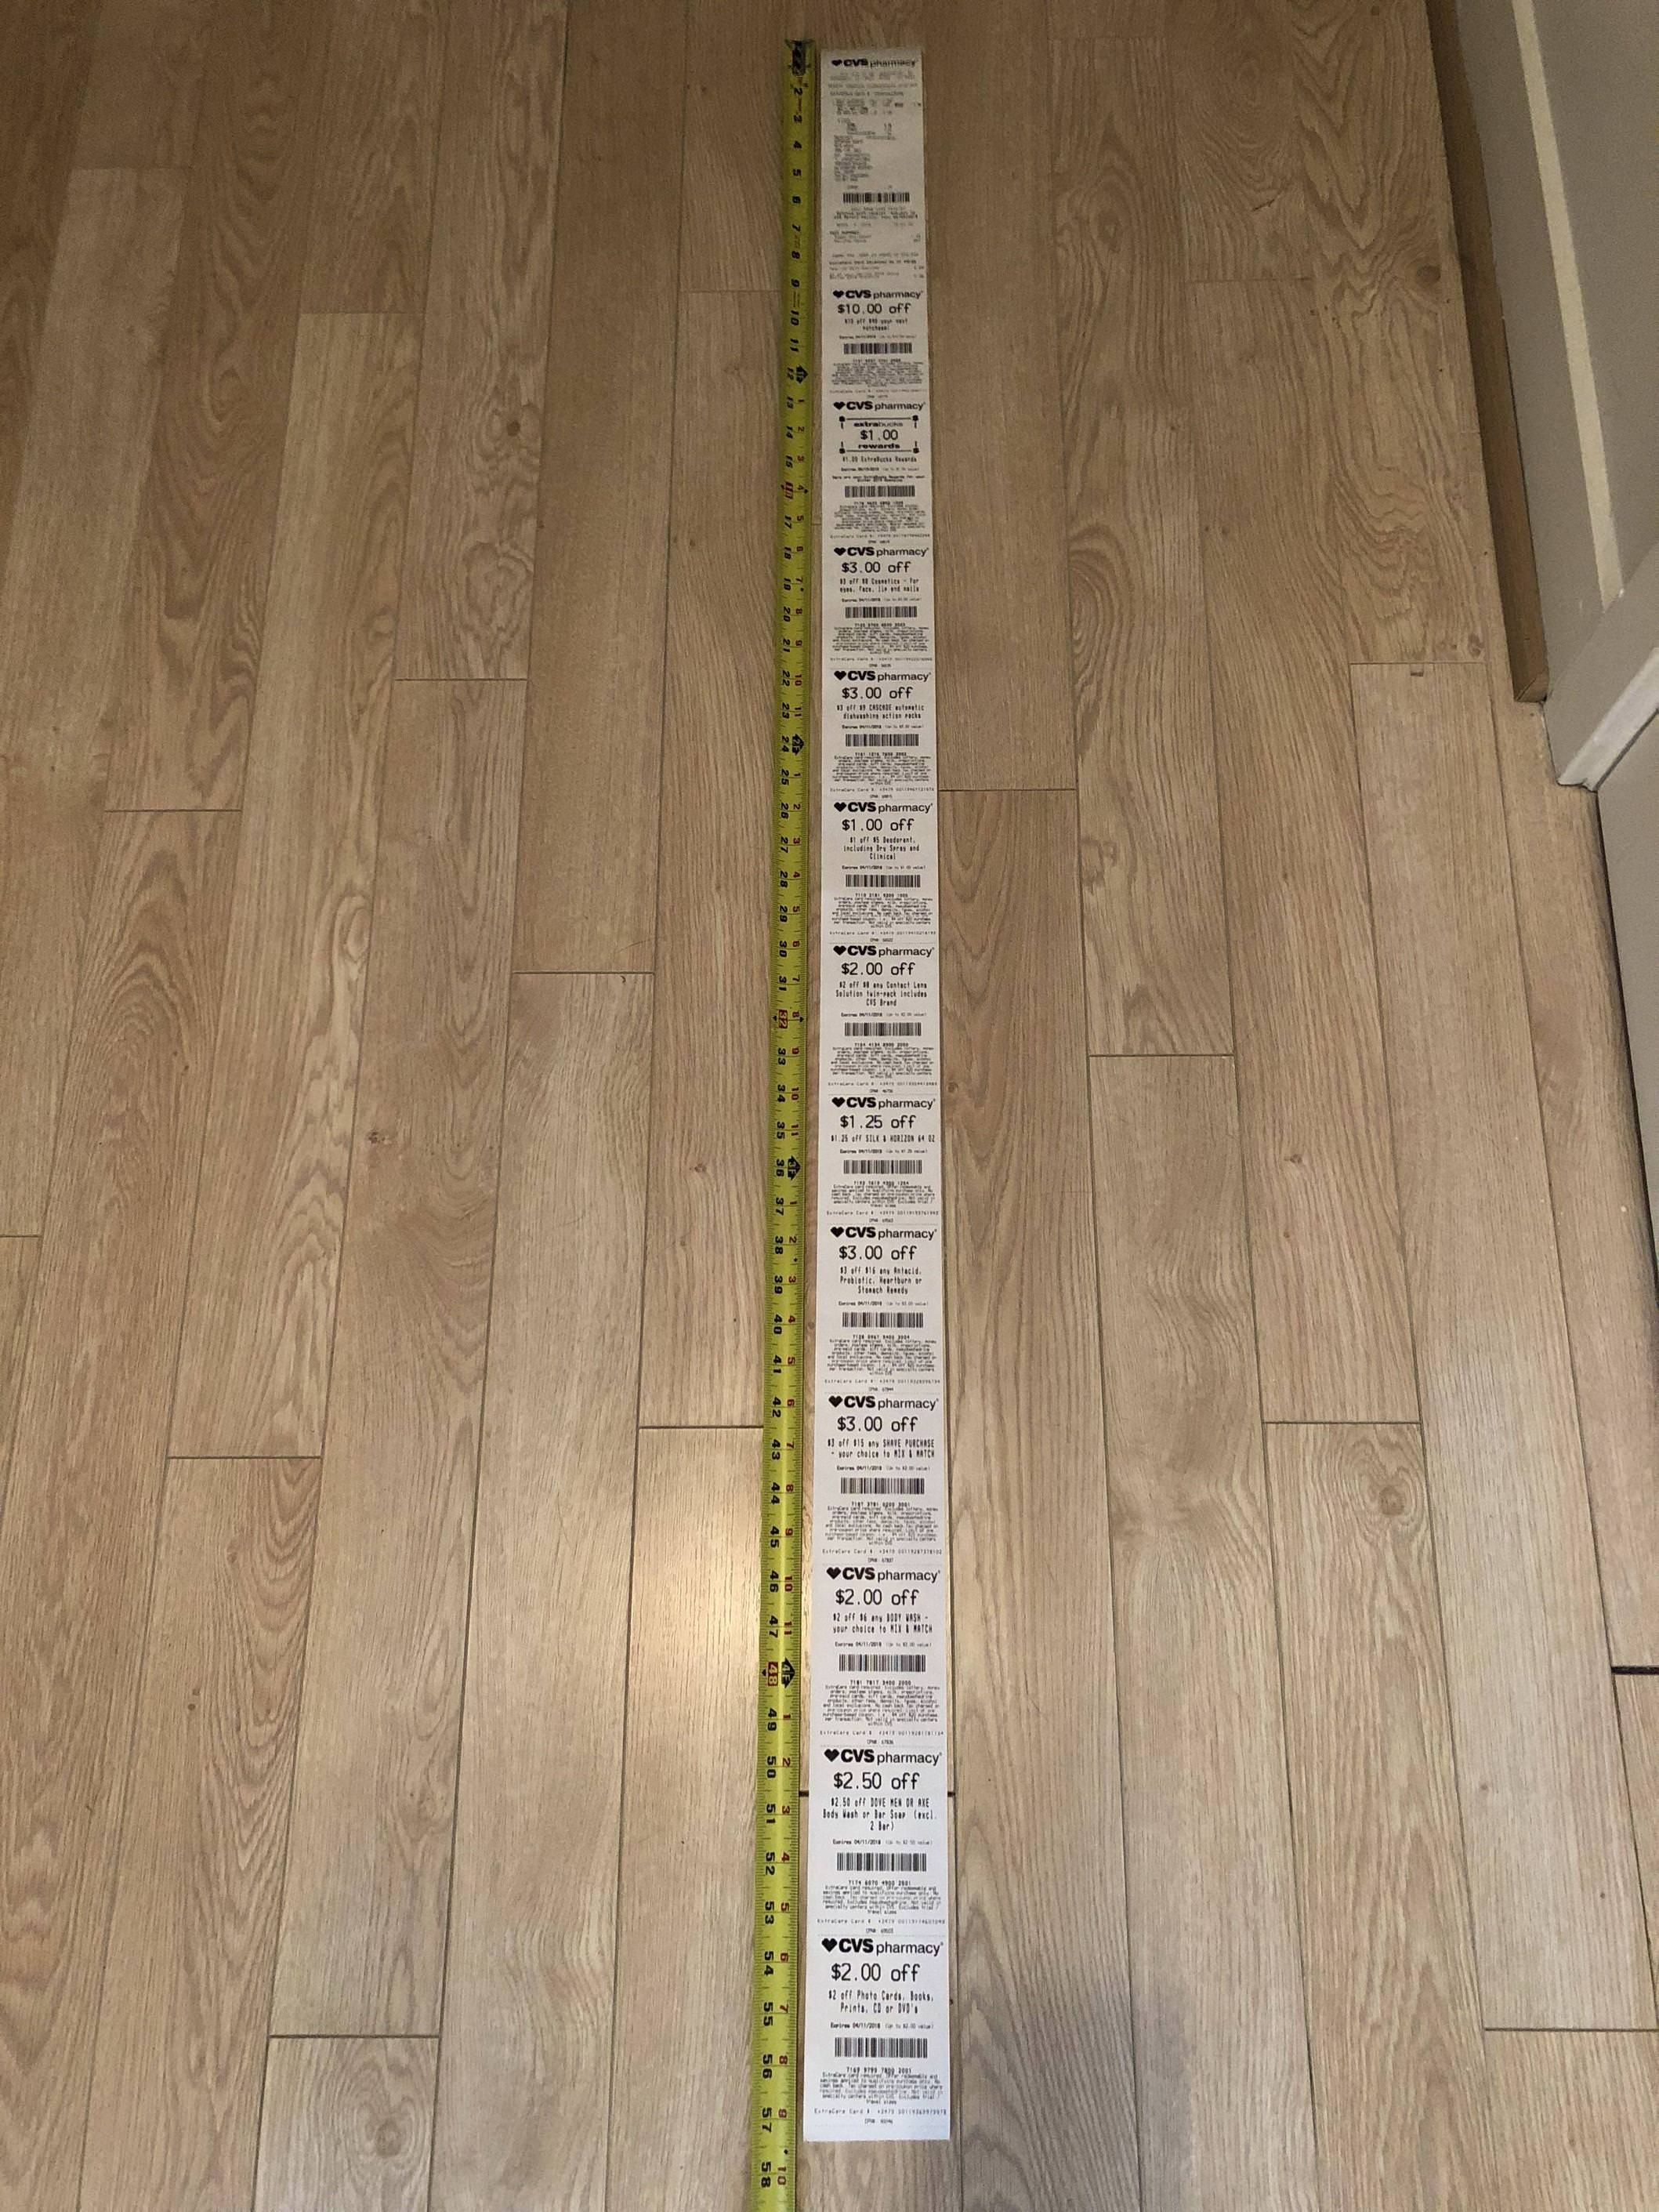 New CVS personal record - 57.5” for a $4.18 transaction